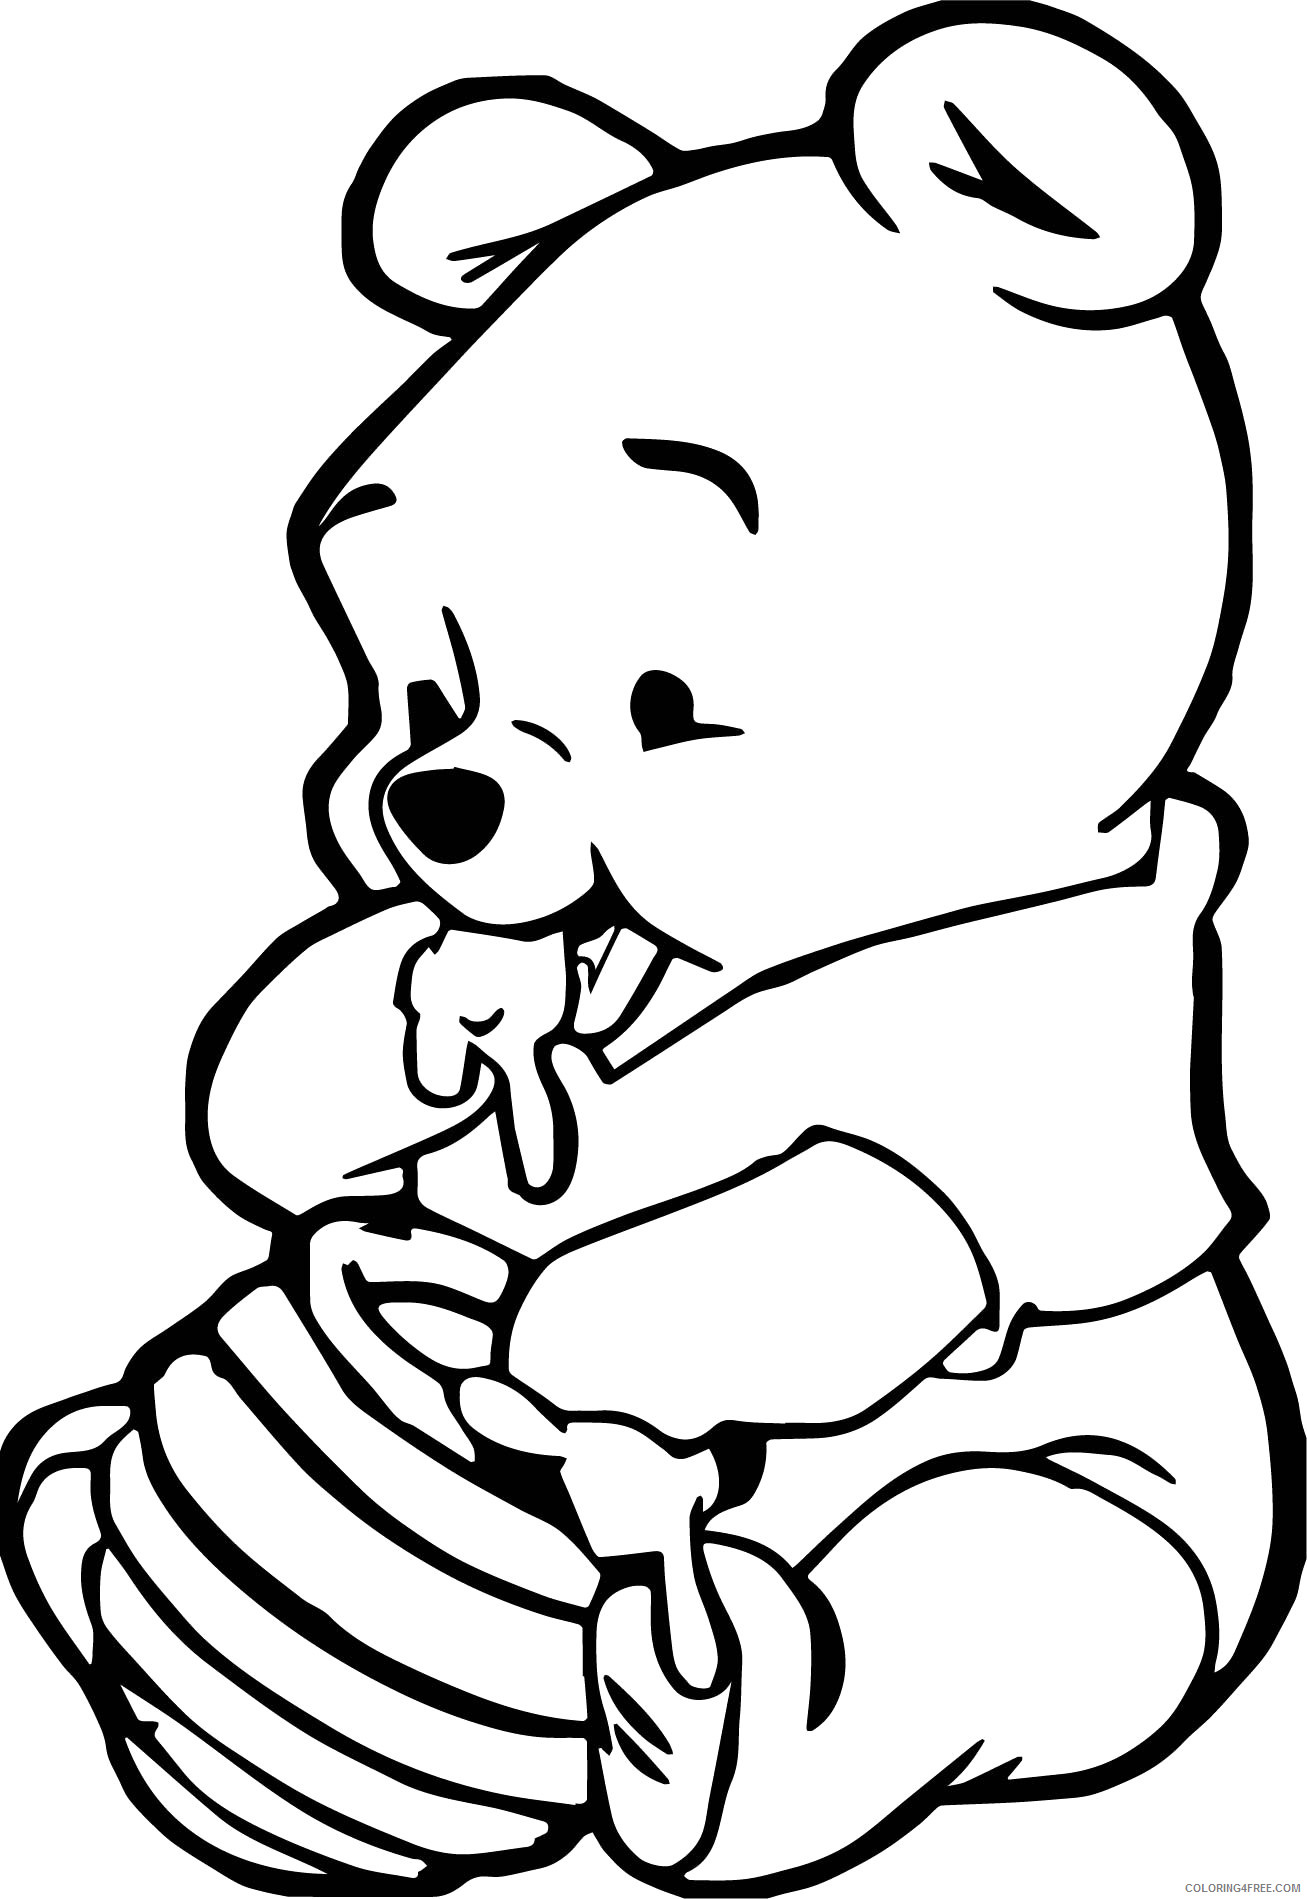 Winnie the Pooh Coloring Pages Cartoons Baby Animal Winnie the Pooh Printable 2020 6934 Coloring4free